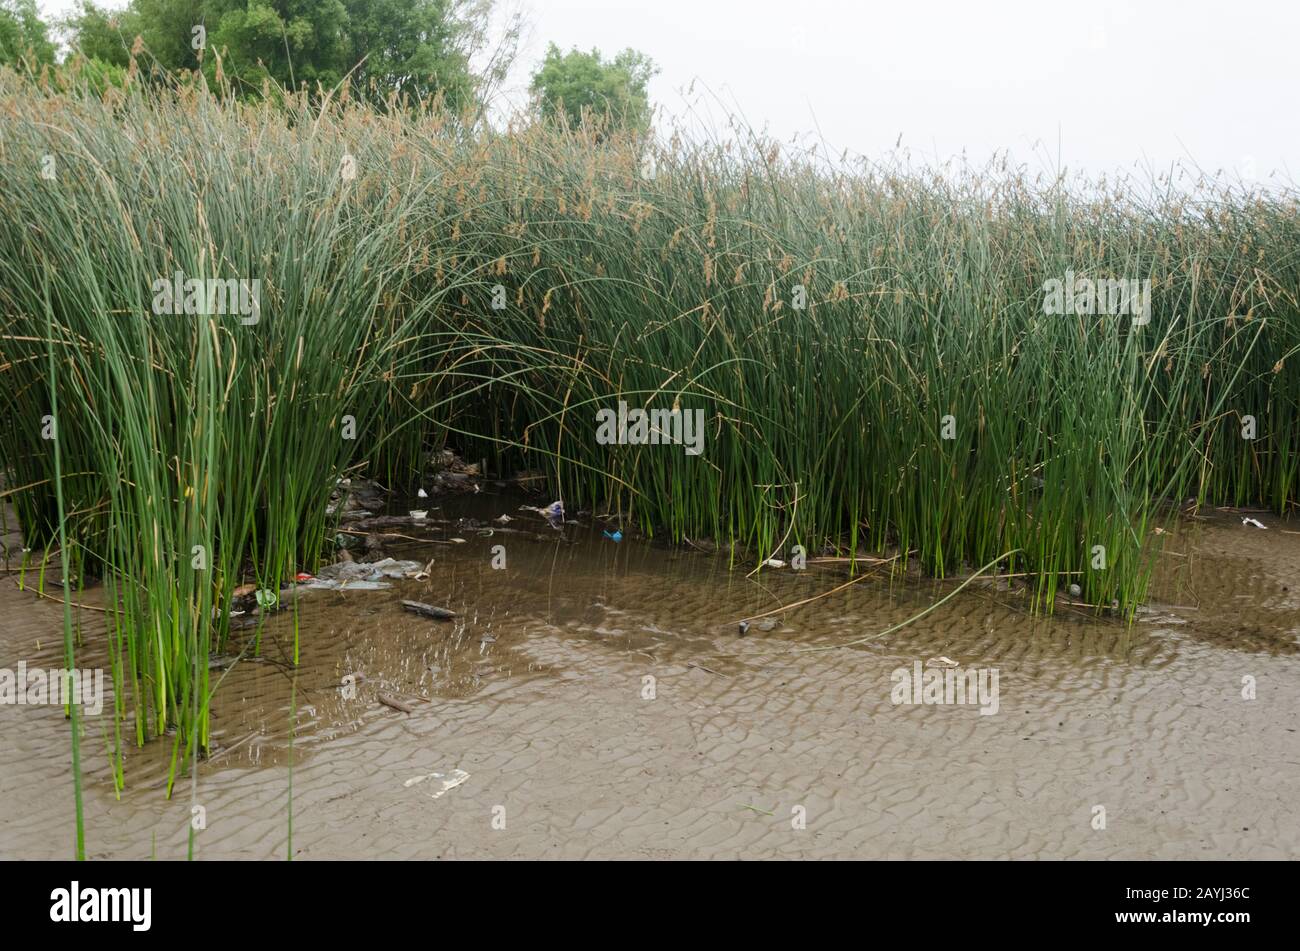 Bank of the Río de la Plata river, contaminated, in San Isidro, Province of Buenos Aires, Argentina. Plastic waste on the surface, between the reeds, Stock Photo